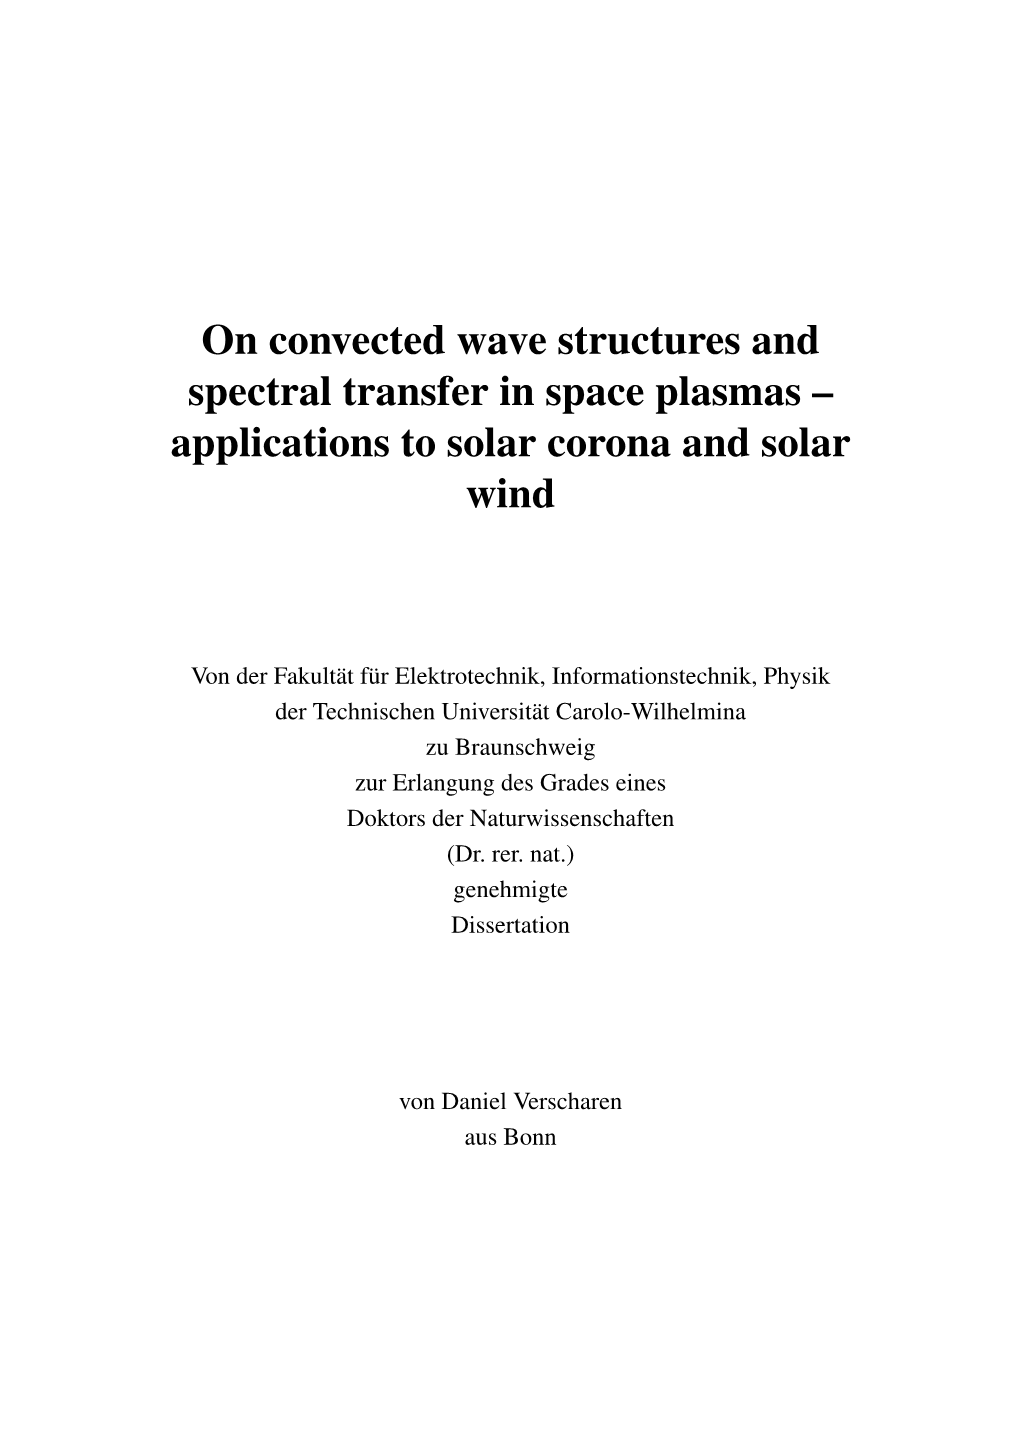 On Convected Wave Structures and Spectral Transfer in Space Plasmas – Applications to Solar Corona and Solar Wind